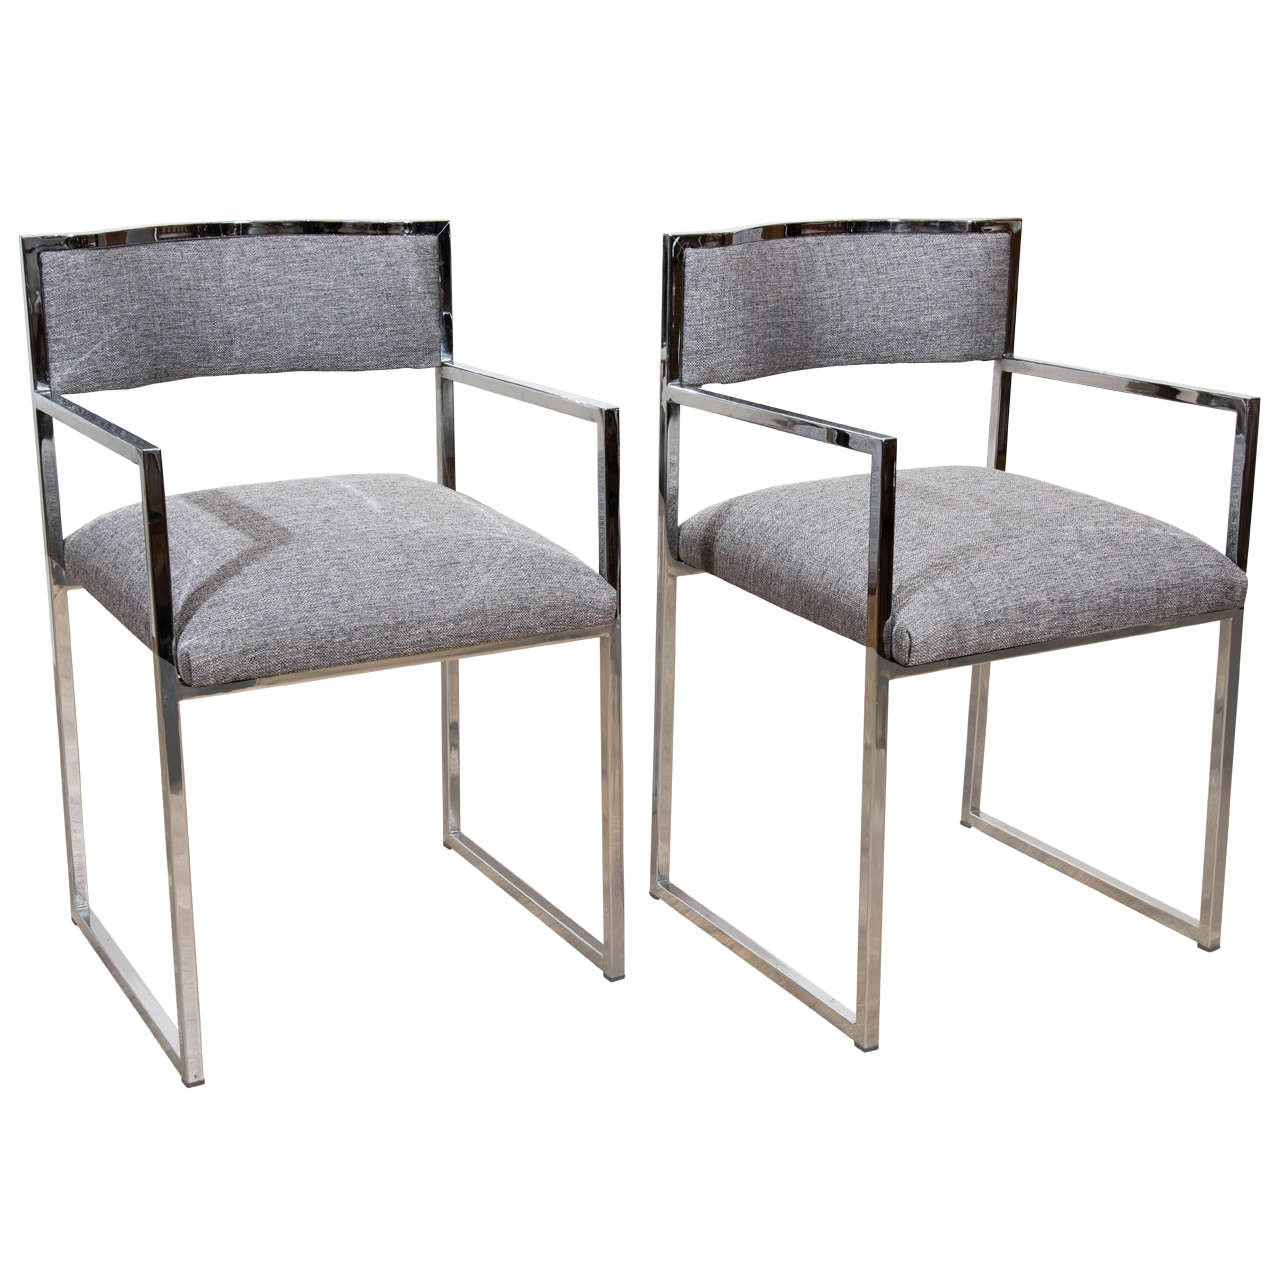 Pair of Chrome Metal Arm Chairs by Willy Rizzo